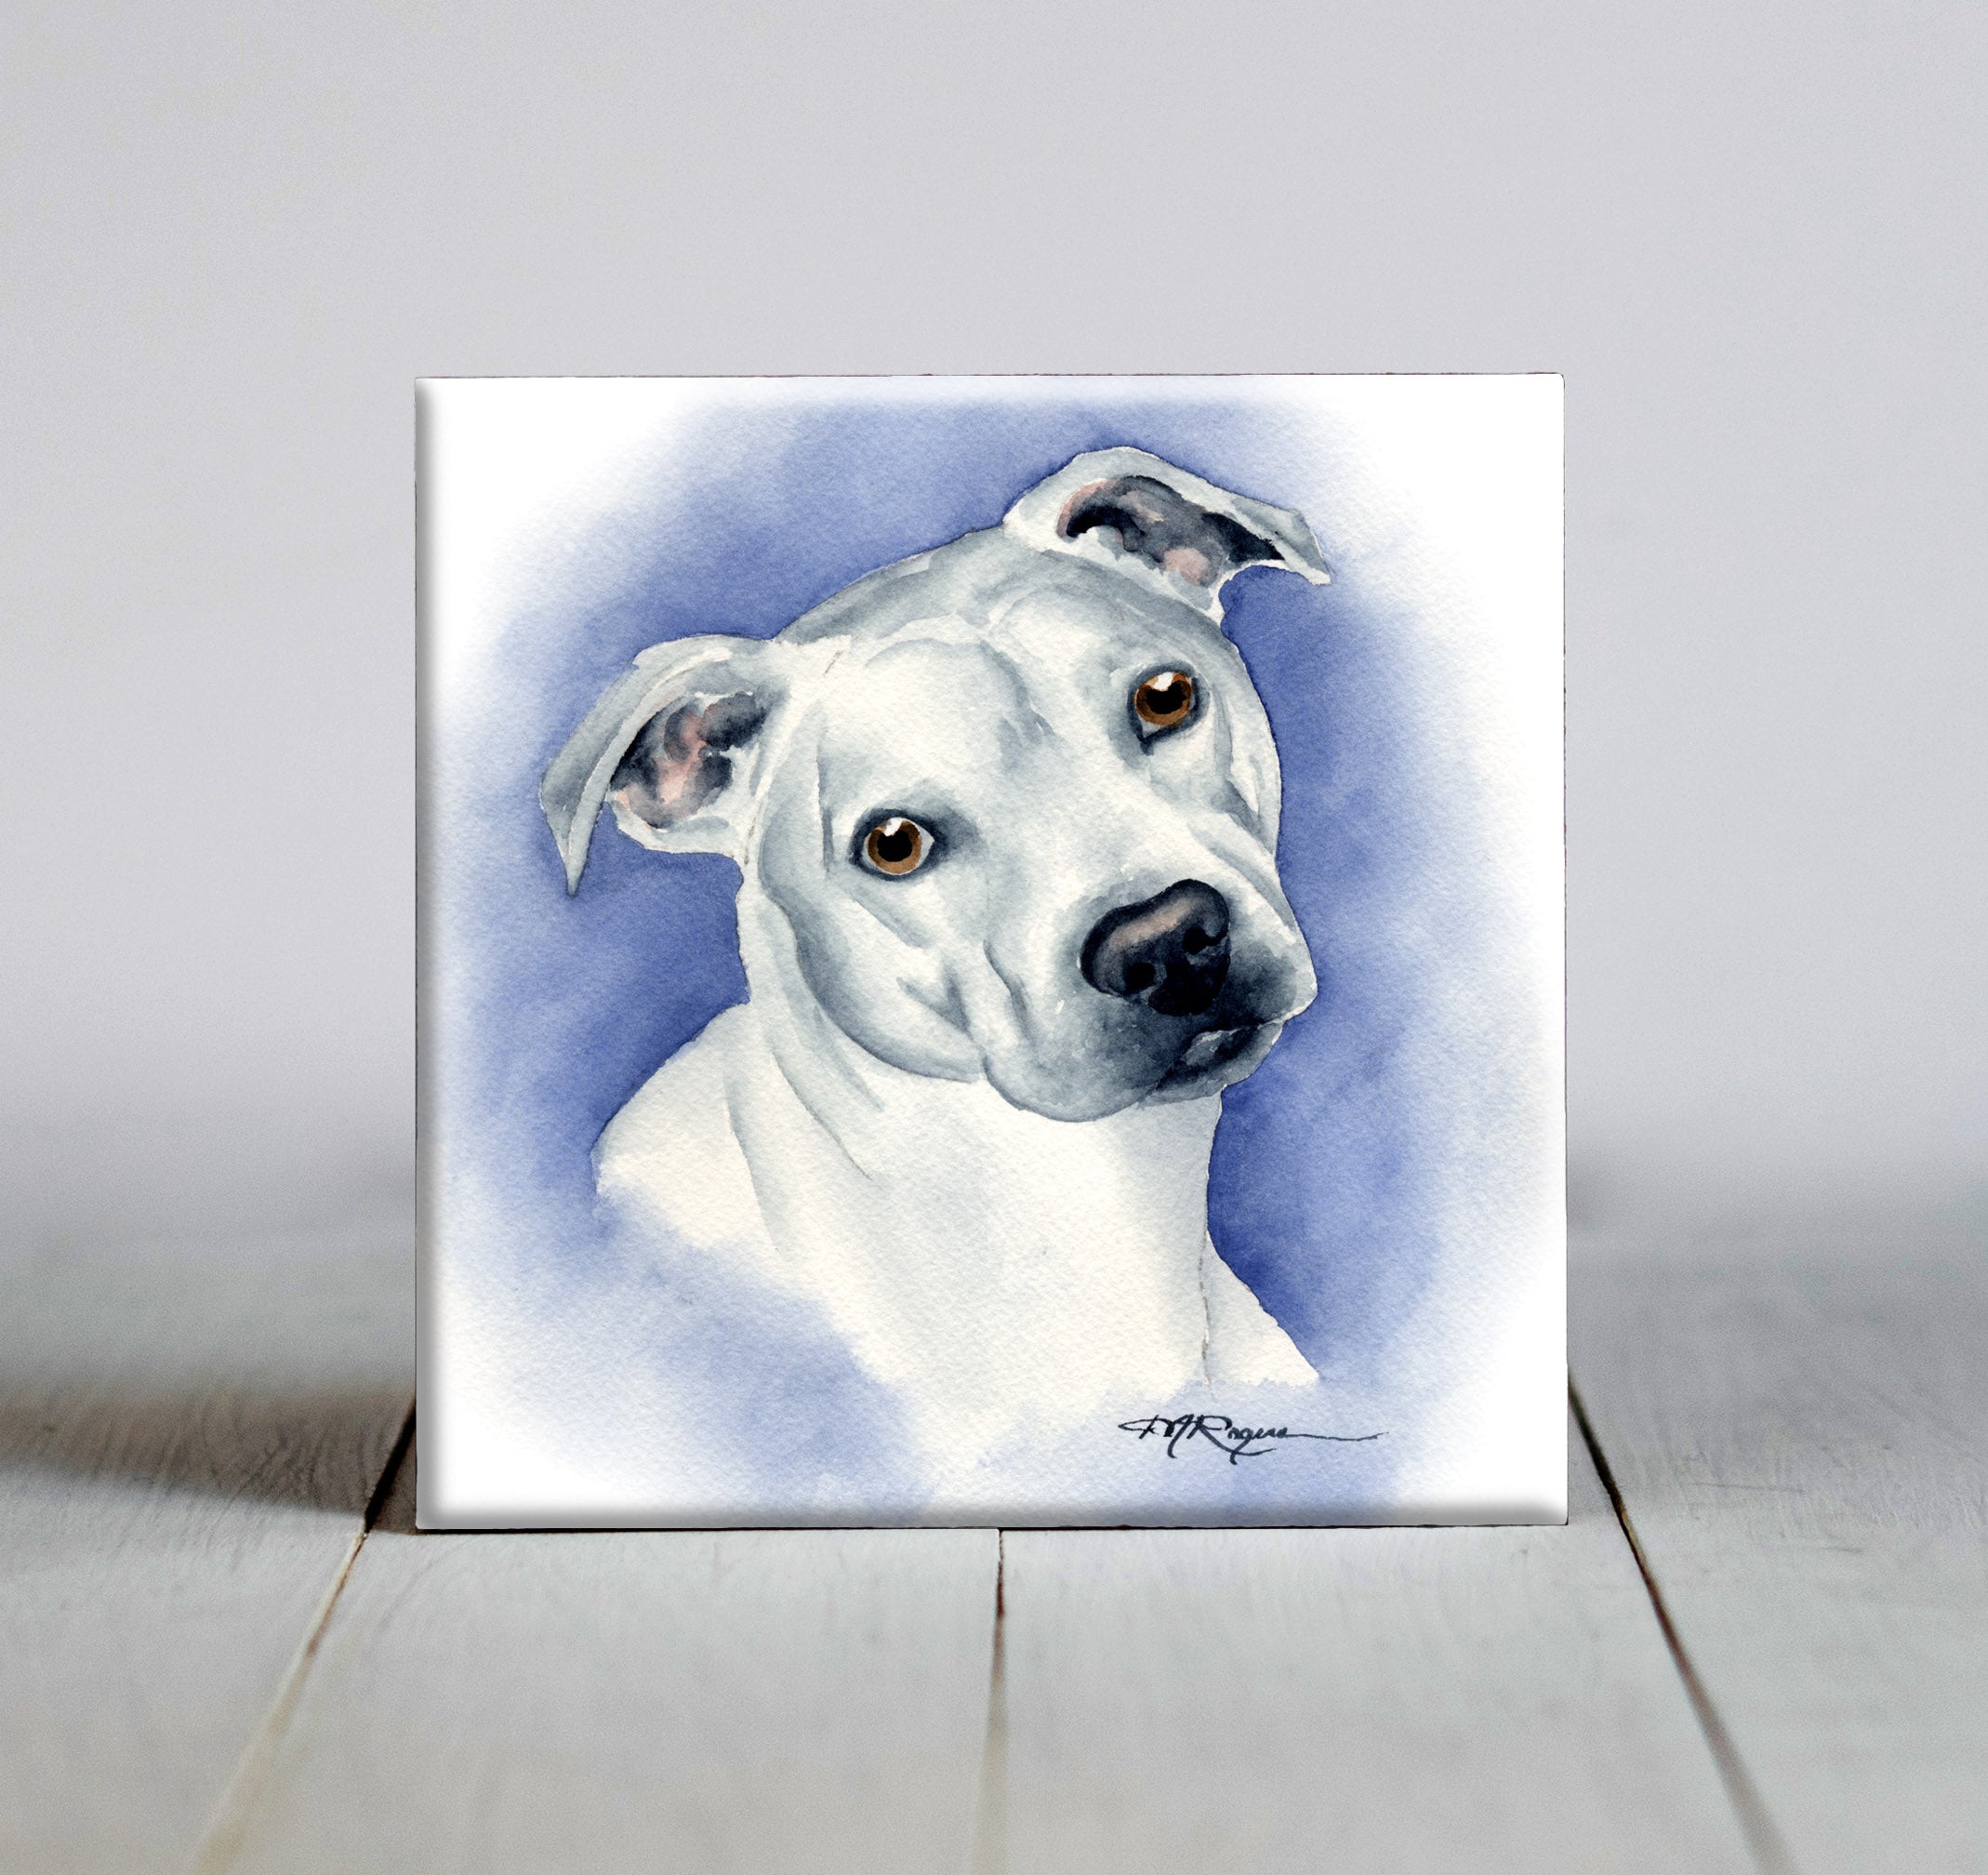 American Pit Bull Terrier Traditional Watercolor Dog Art Decorative Tile by Artist DJ Rogers